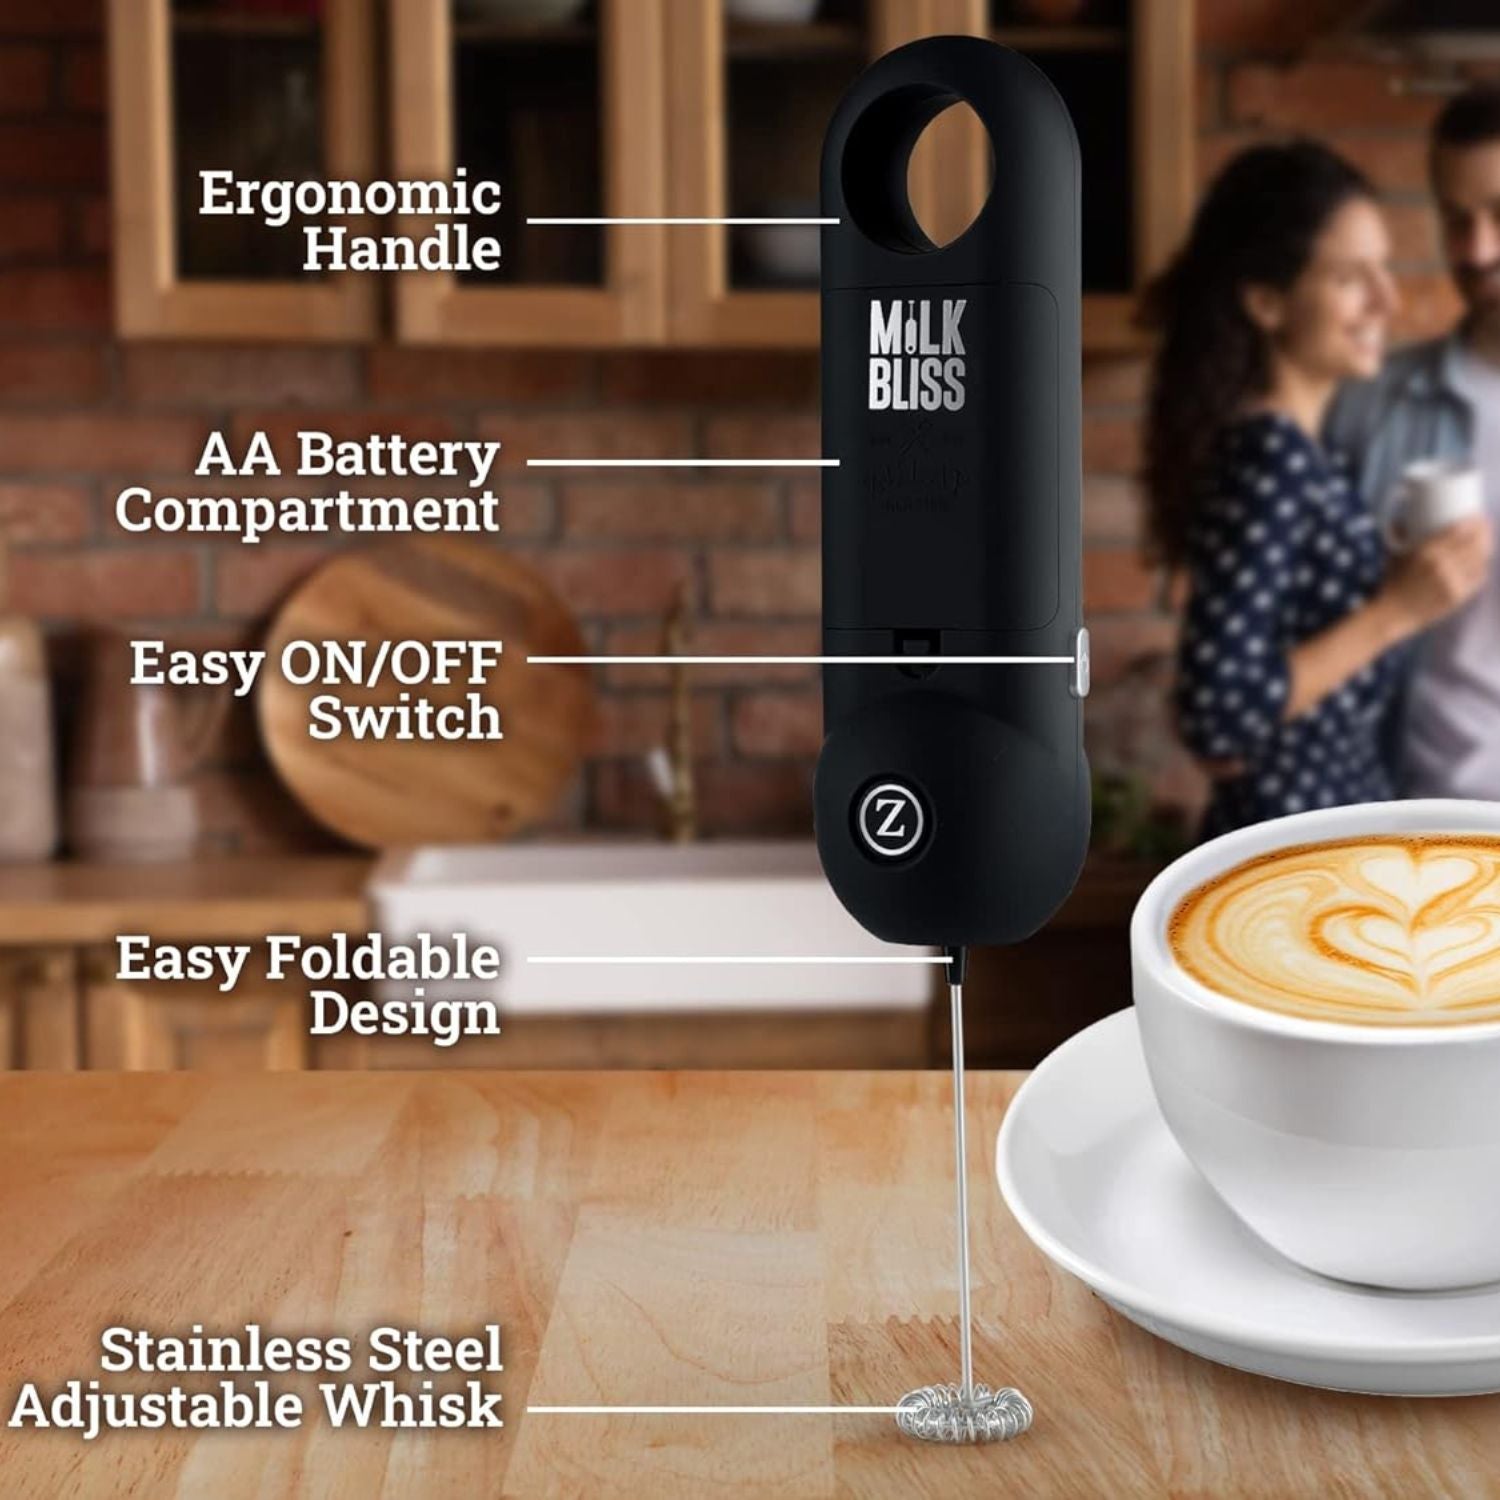 Electric Milk Frother Handheld for Drink Mixer Battery Operated, Latte,  Coffee, Foam and Cappuccino Maker - Includes Stainless Steel Stand Red 